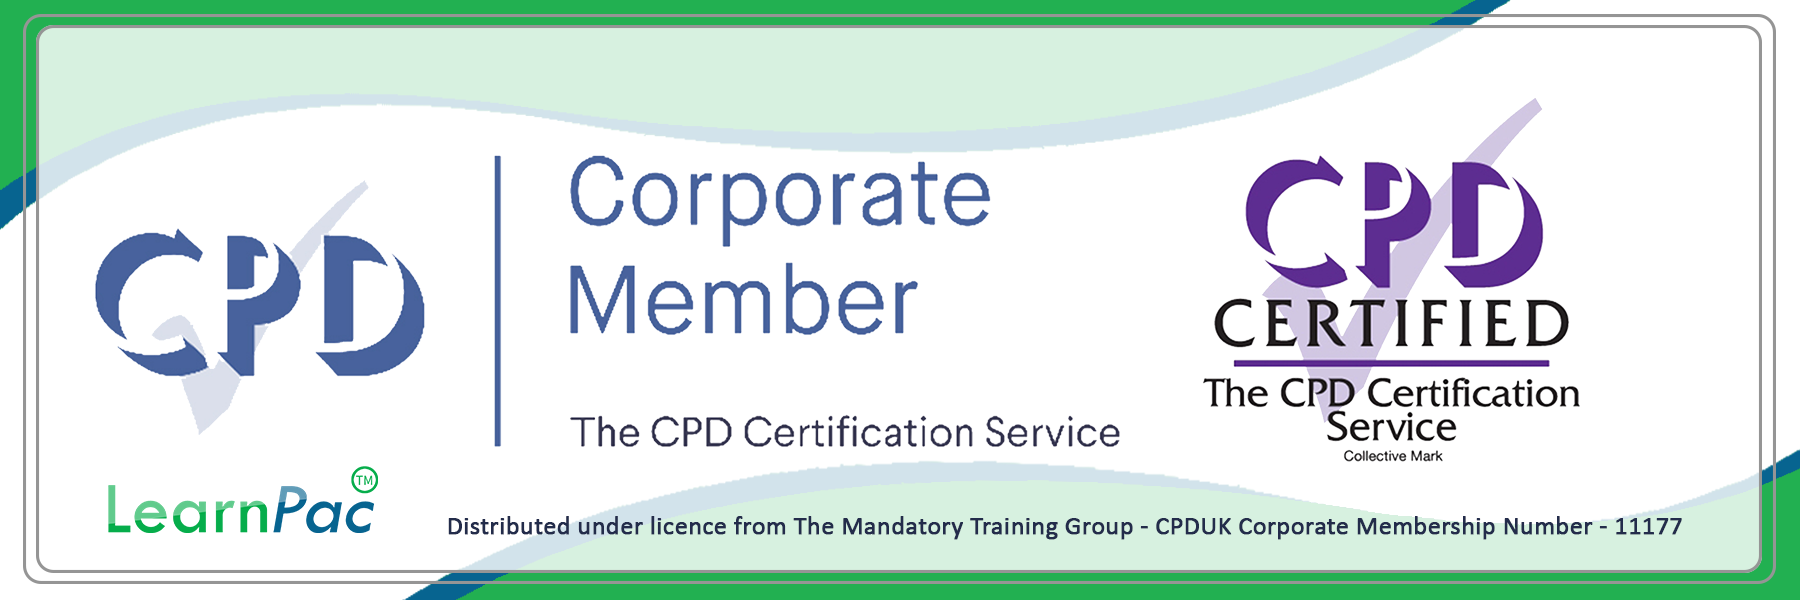 First Aid Training - E-Learning Courses with Certificates - CPD Certified - LearnPac Systems UK -